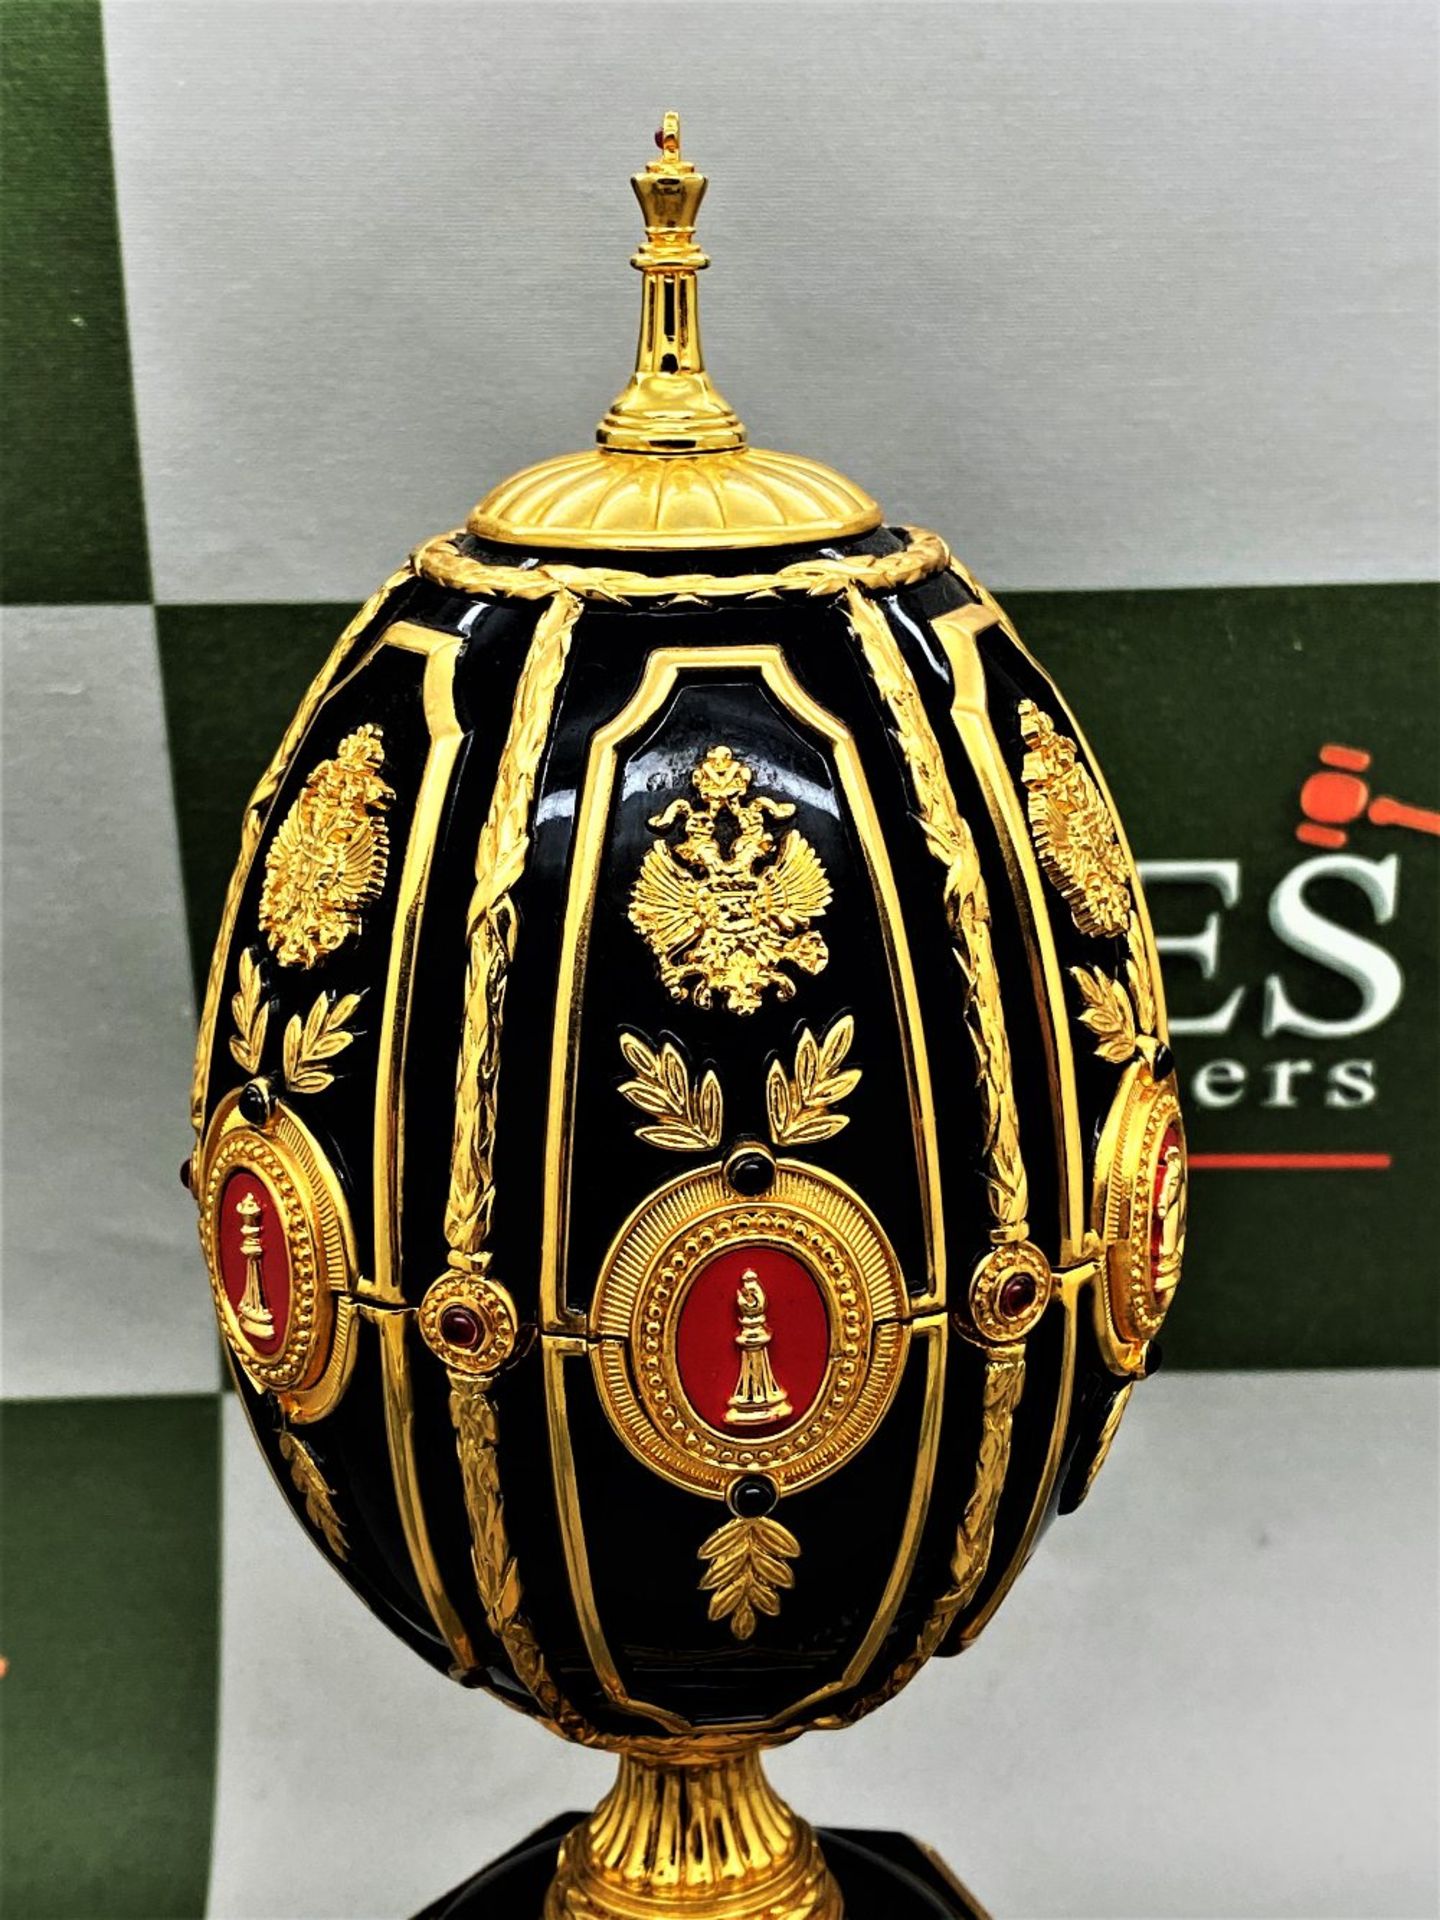 Faberge 24 Ct Gold- The Imperial Jeweled Egg Chess Set - Image 3 of 6